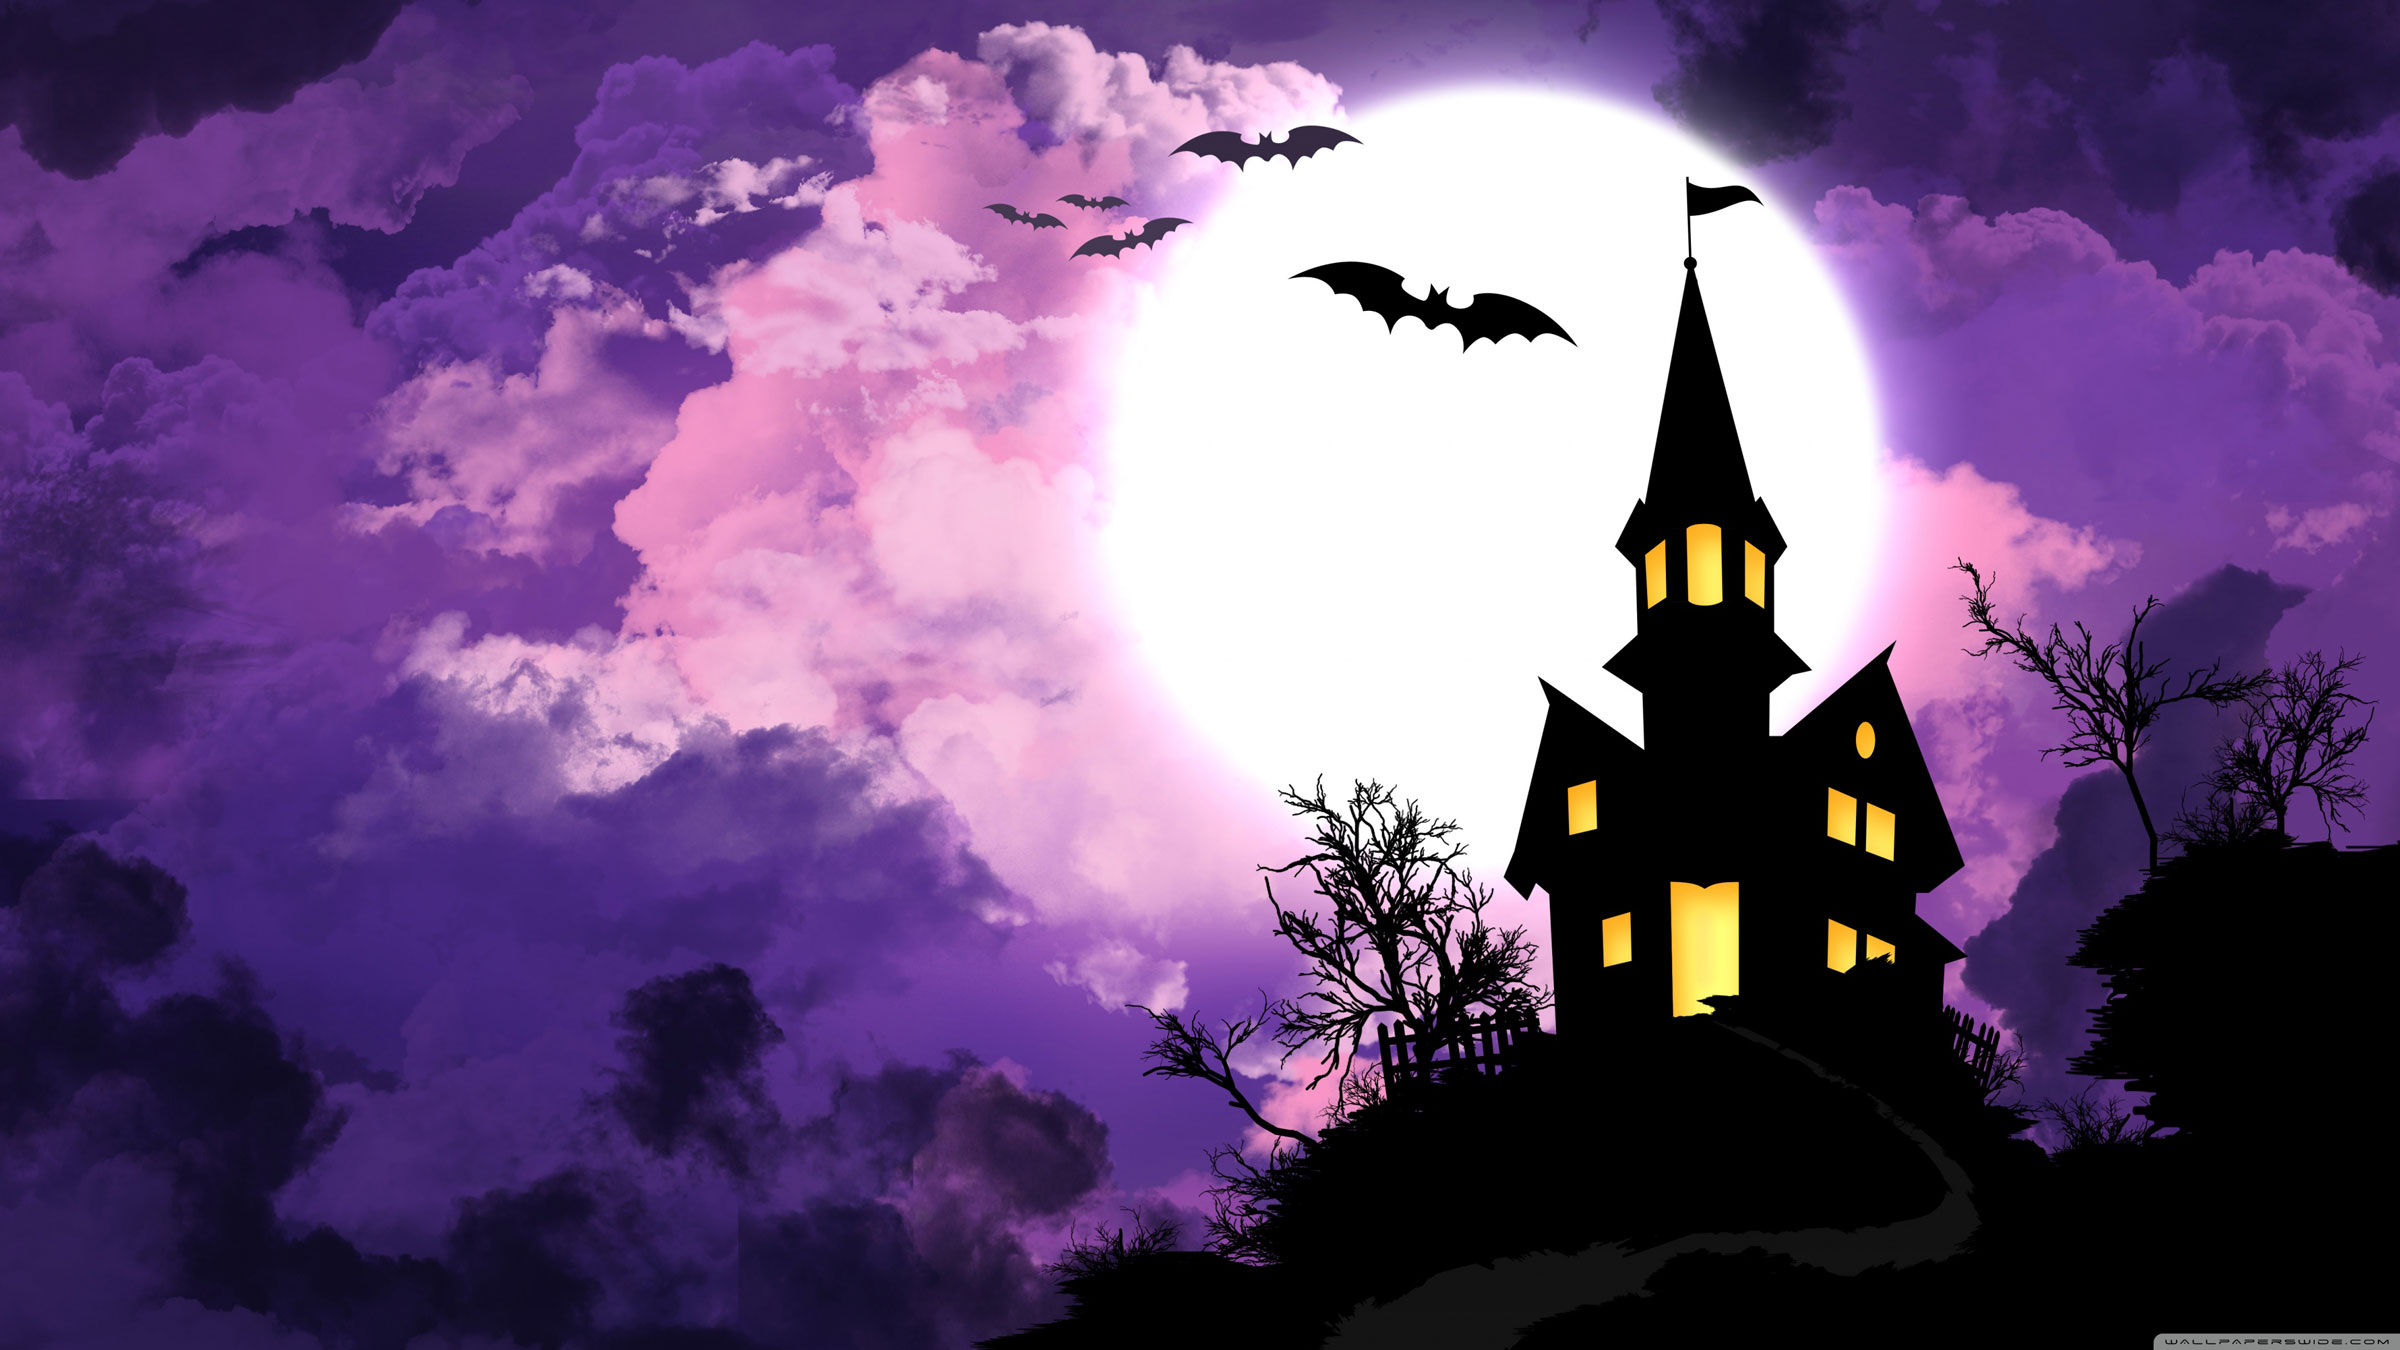 Scary Halloween 2018 HD Wallpaper, Background, Pumpkins, Witches, Spider Web, Bats & Ghosts